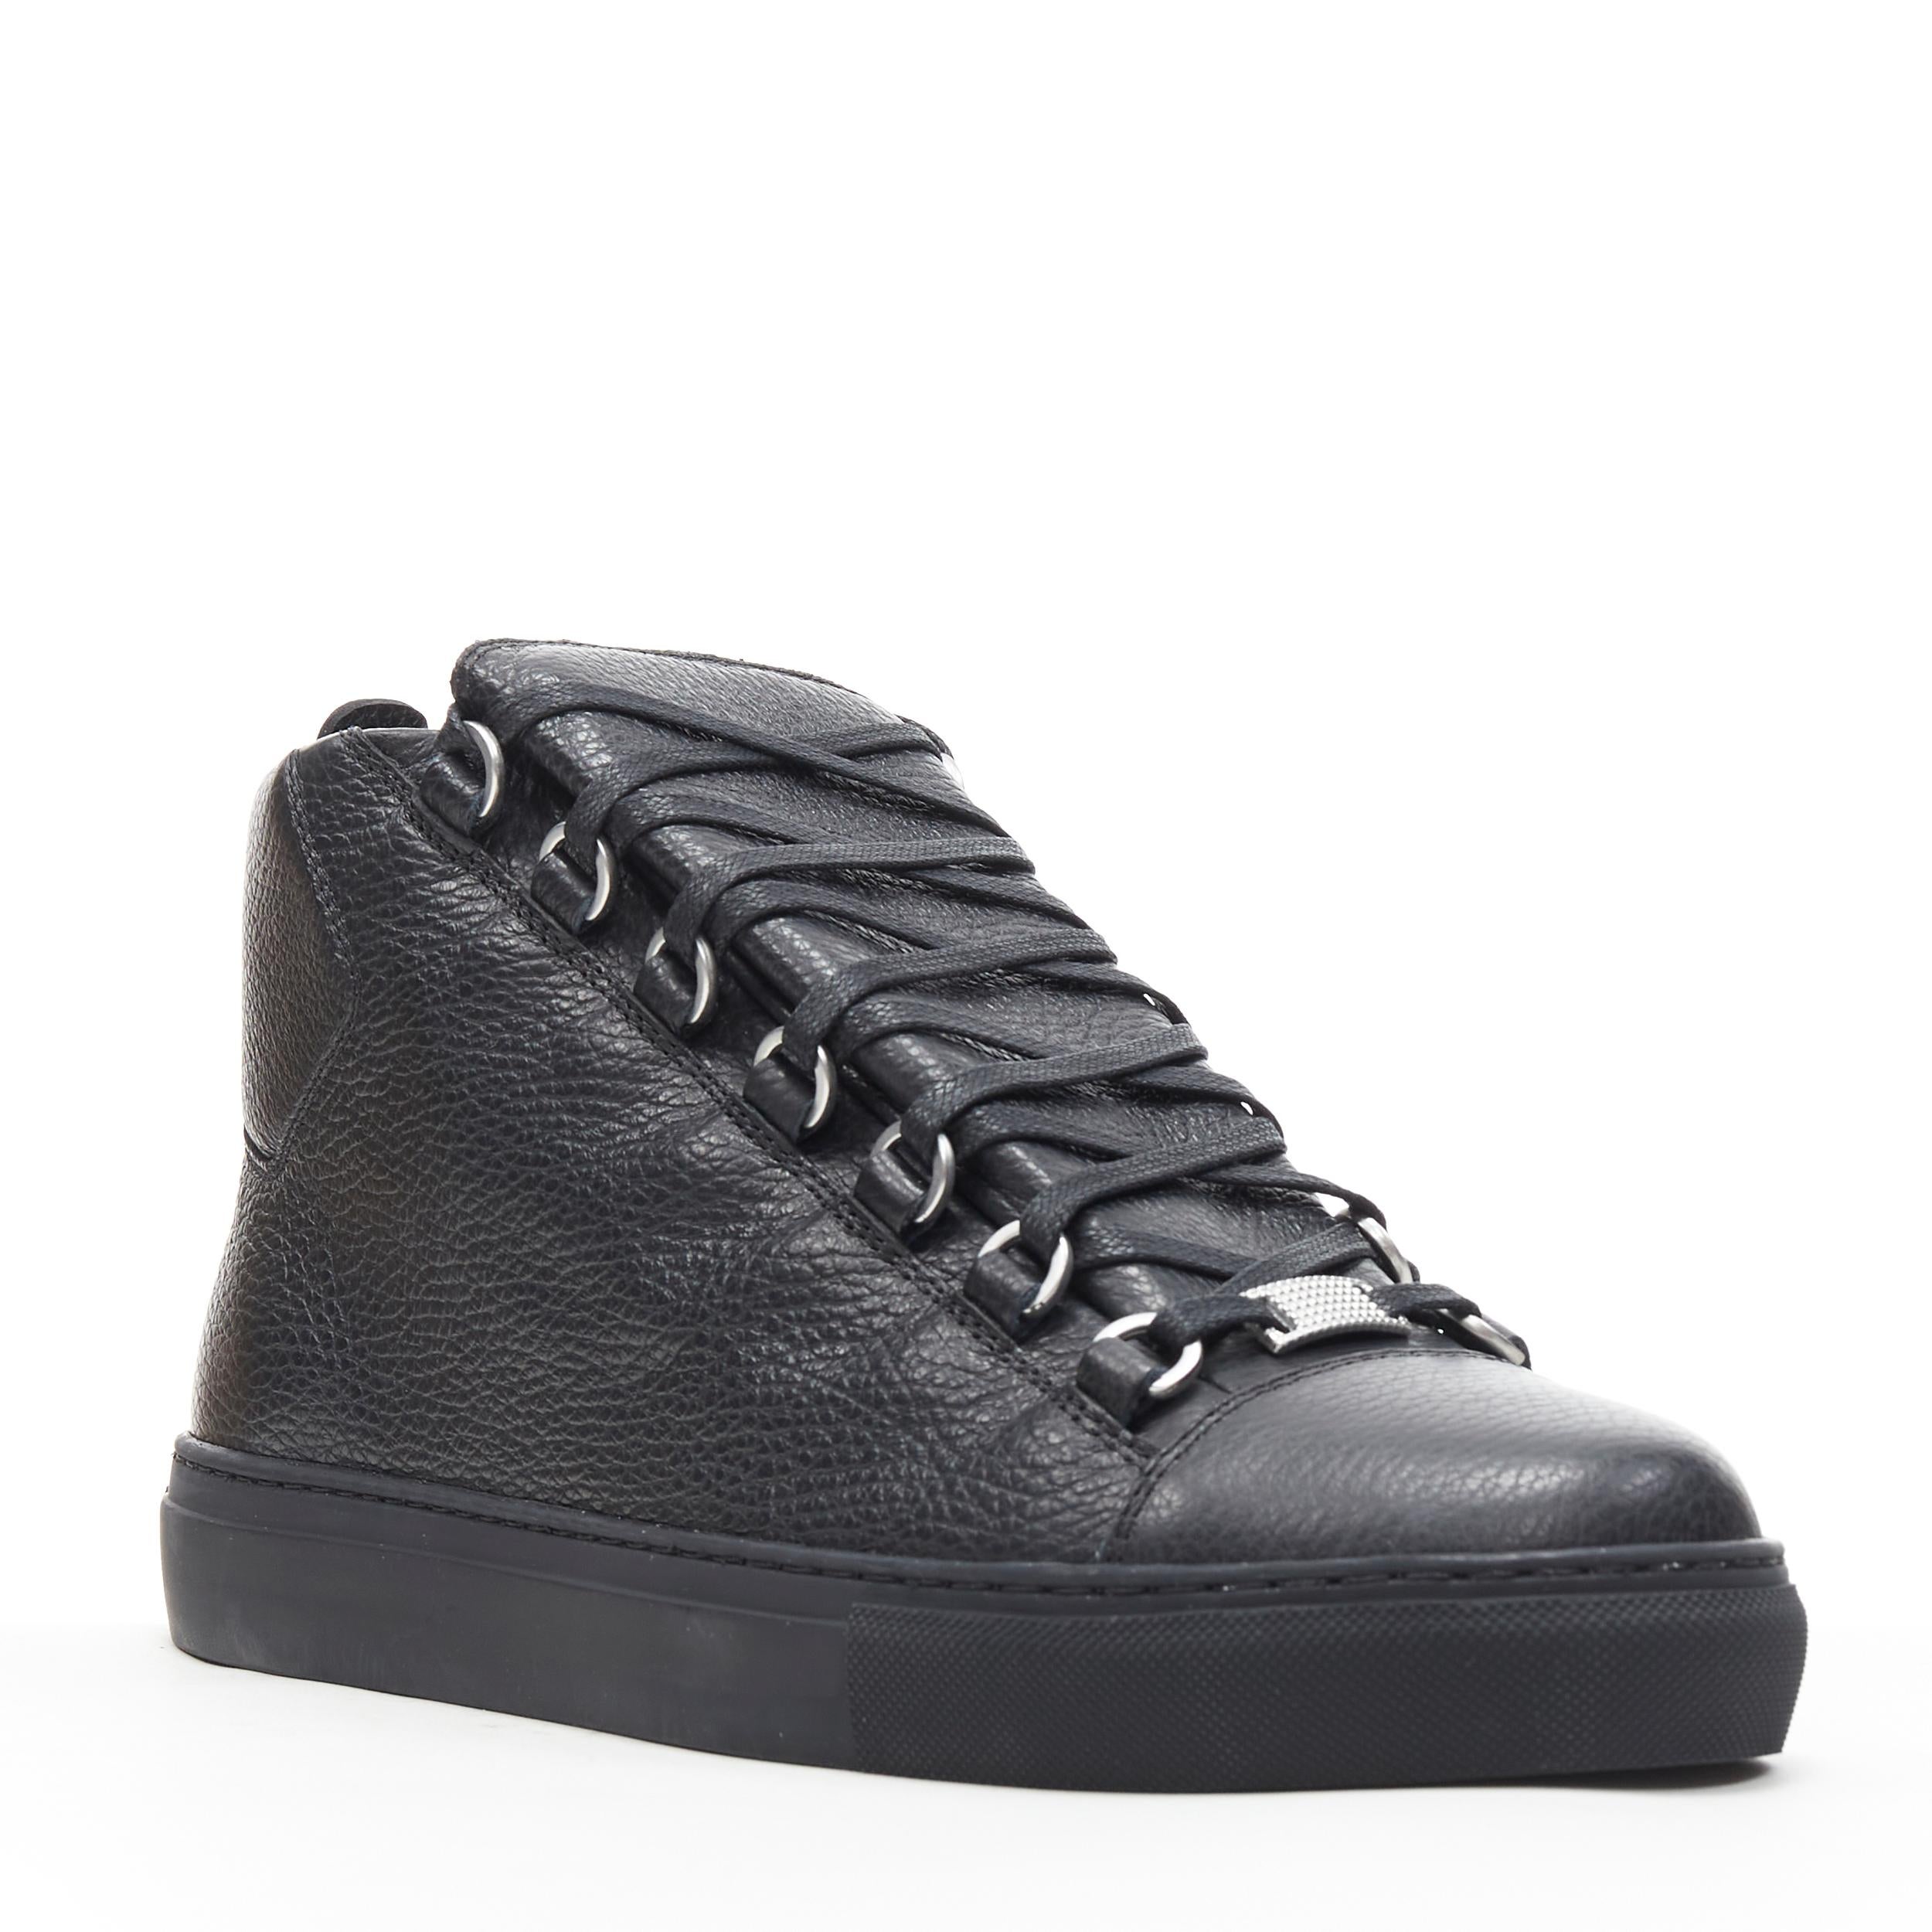 new BALENCIAGA Arena Black Calf high top sneakers EU44 US10 565560 WA2N0 1000 
Reference: TGAS/B00165 
Brand: Balenciaga 
Designer: Demna Gvasalia 
Model: Arena 
Material: Leather 
Color: Black 
Pattern: Solid 
Closure: Lace Up 
Made in: Italy